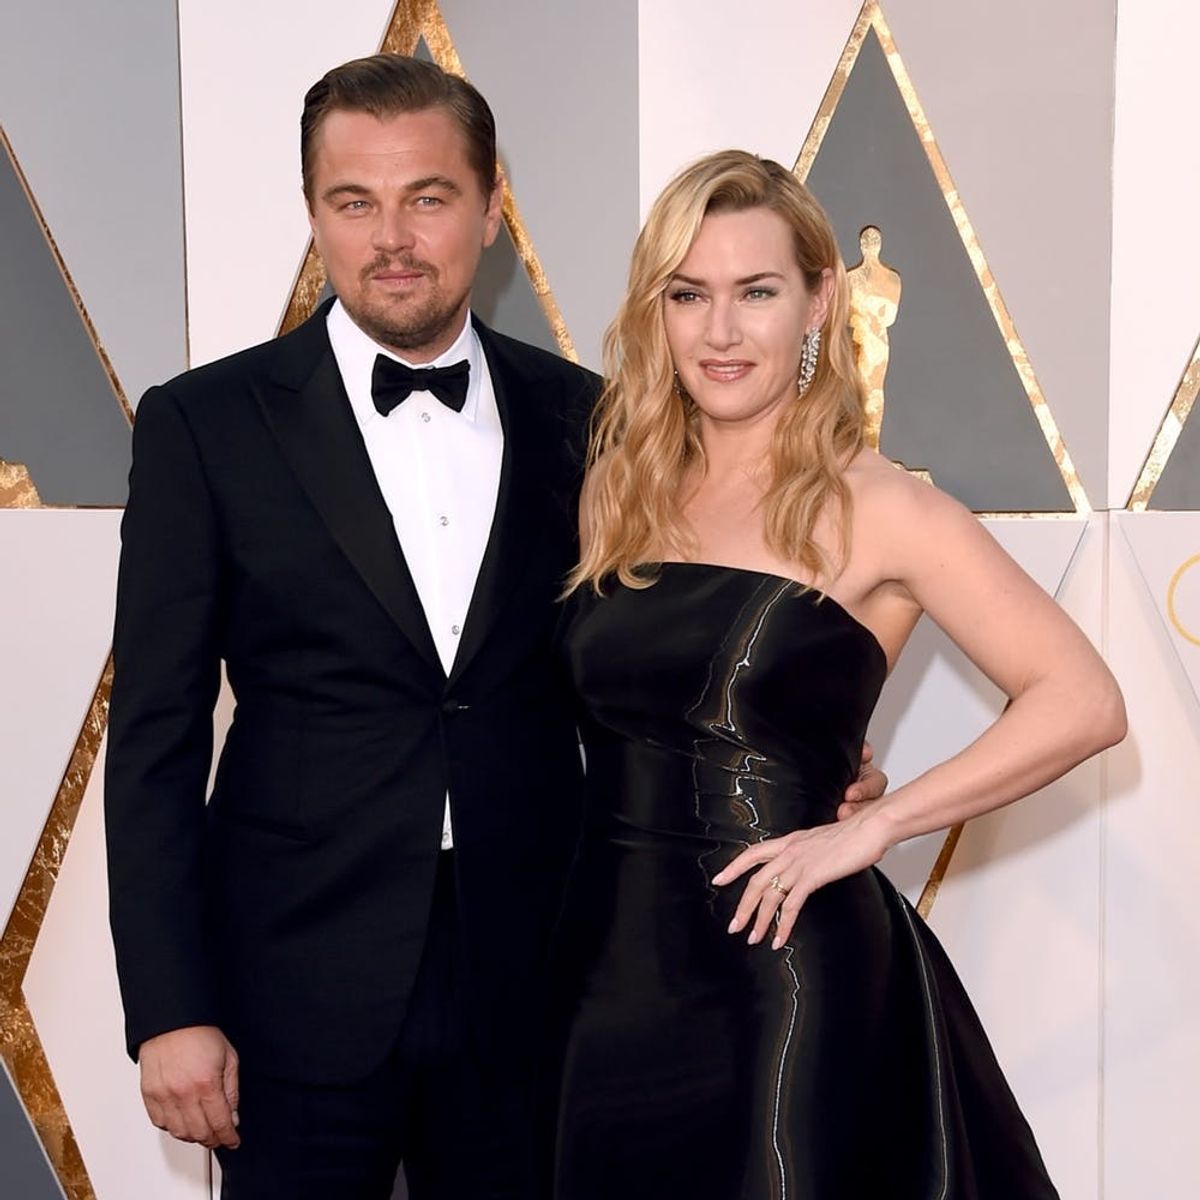 Kate Winslet and BFF Leonardo DiCaprio Recite Lines from “Titanic” to Each Other